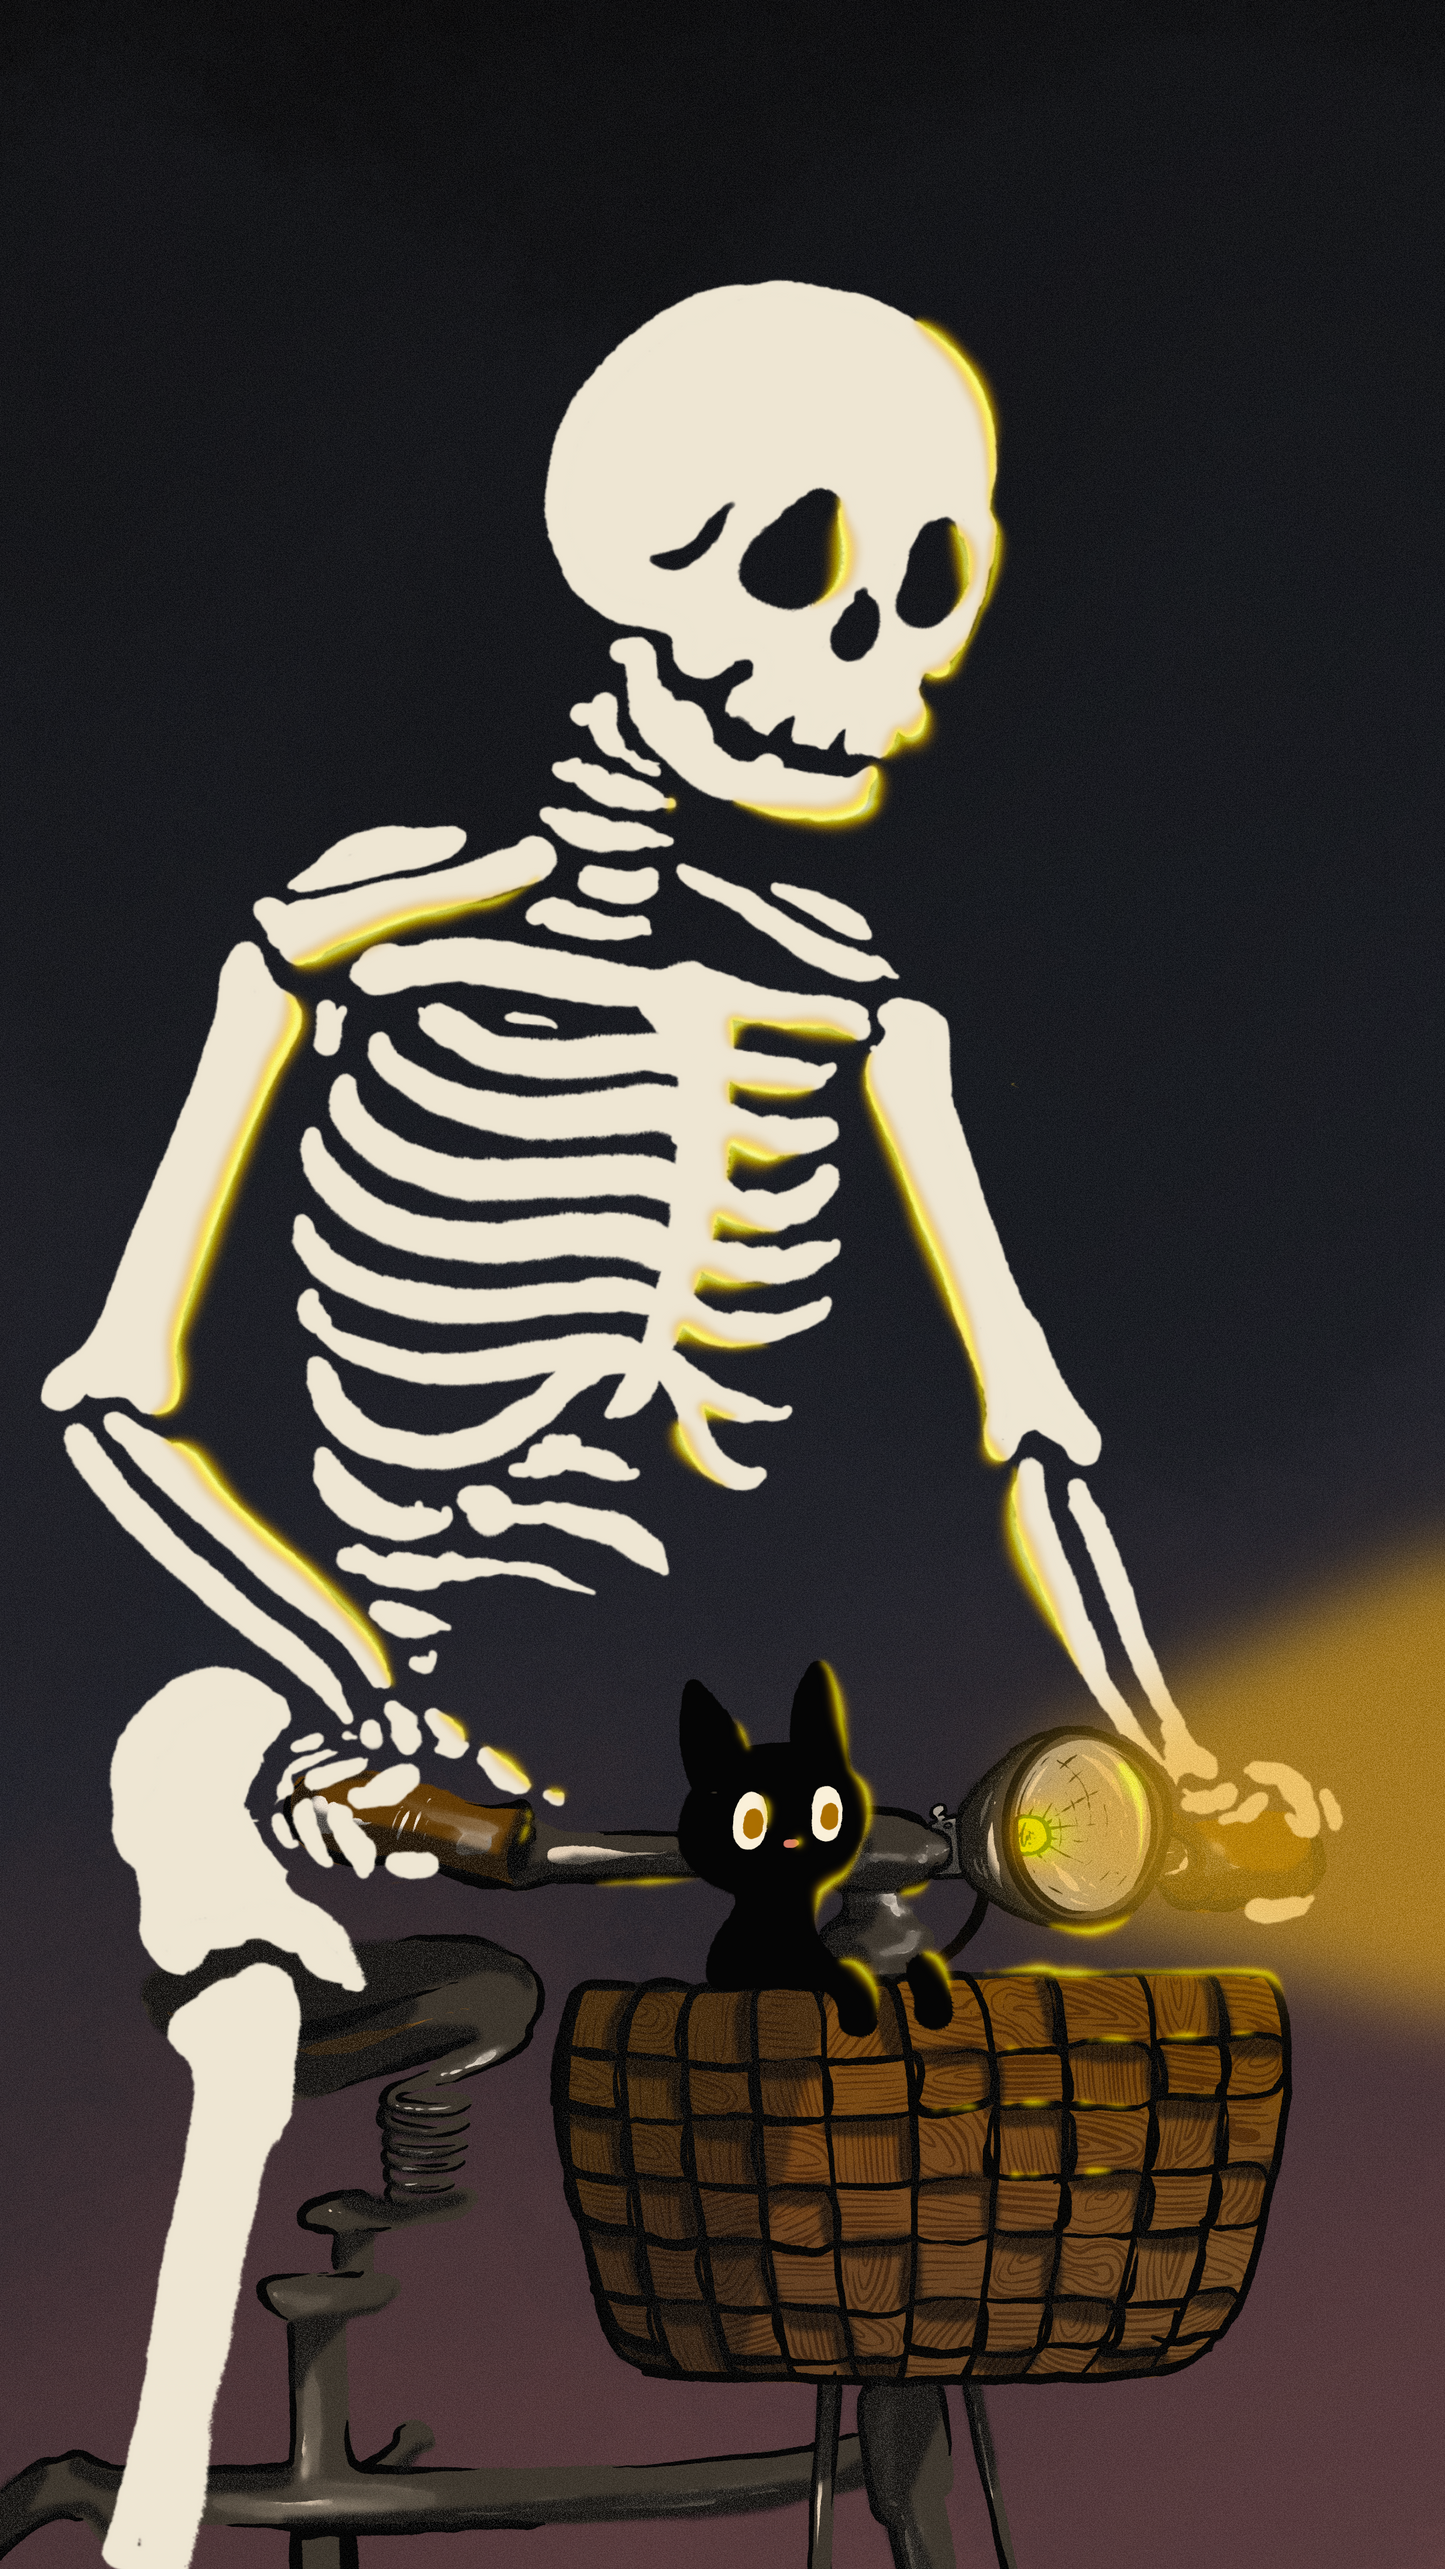 Mr. Skelly and his cat